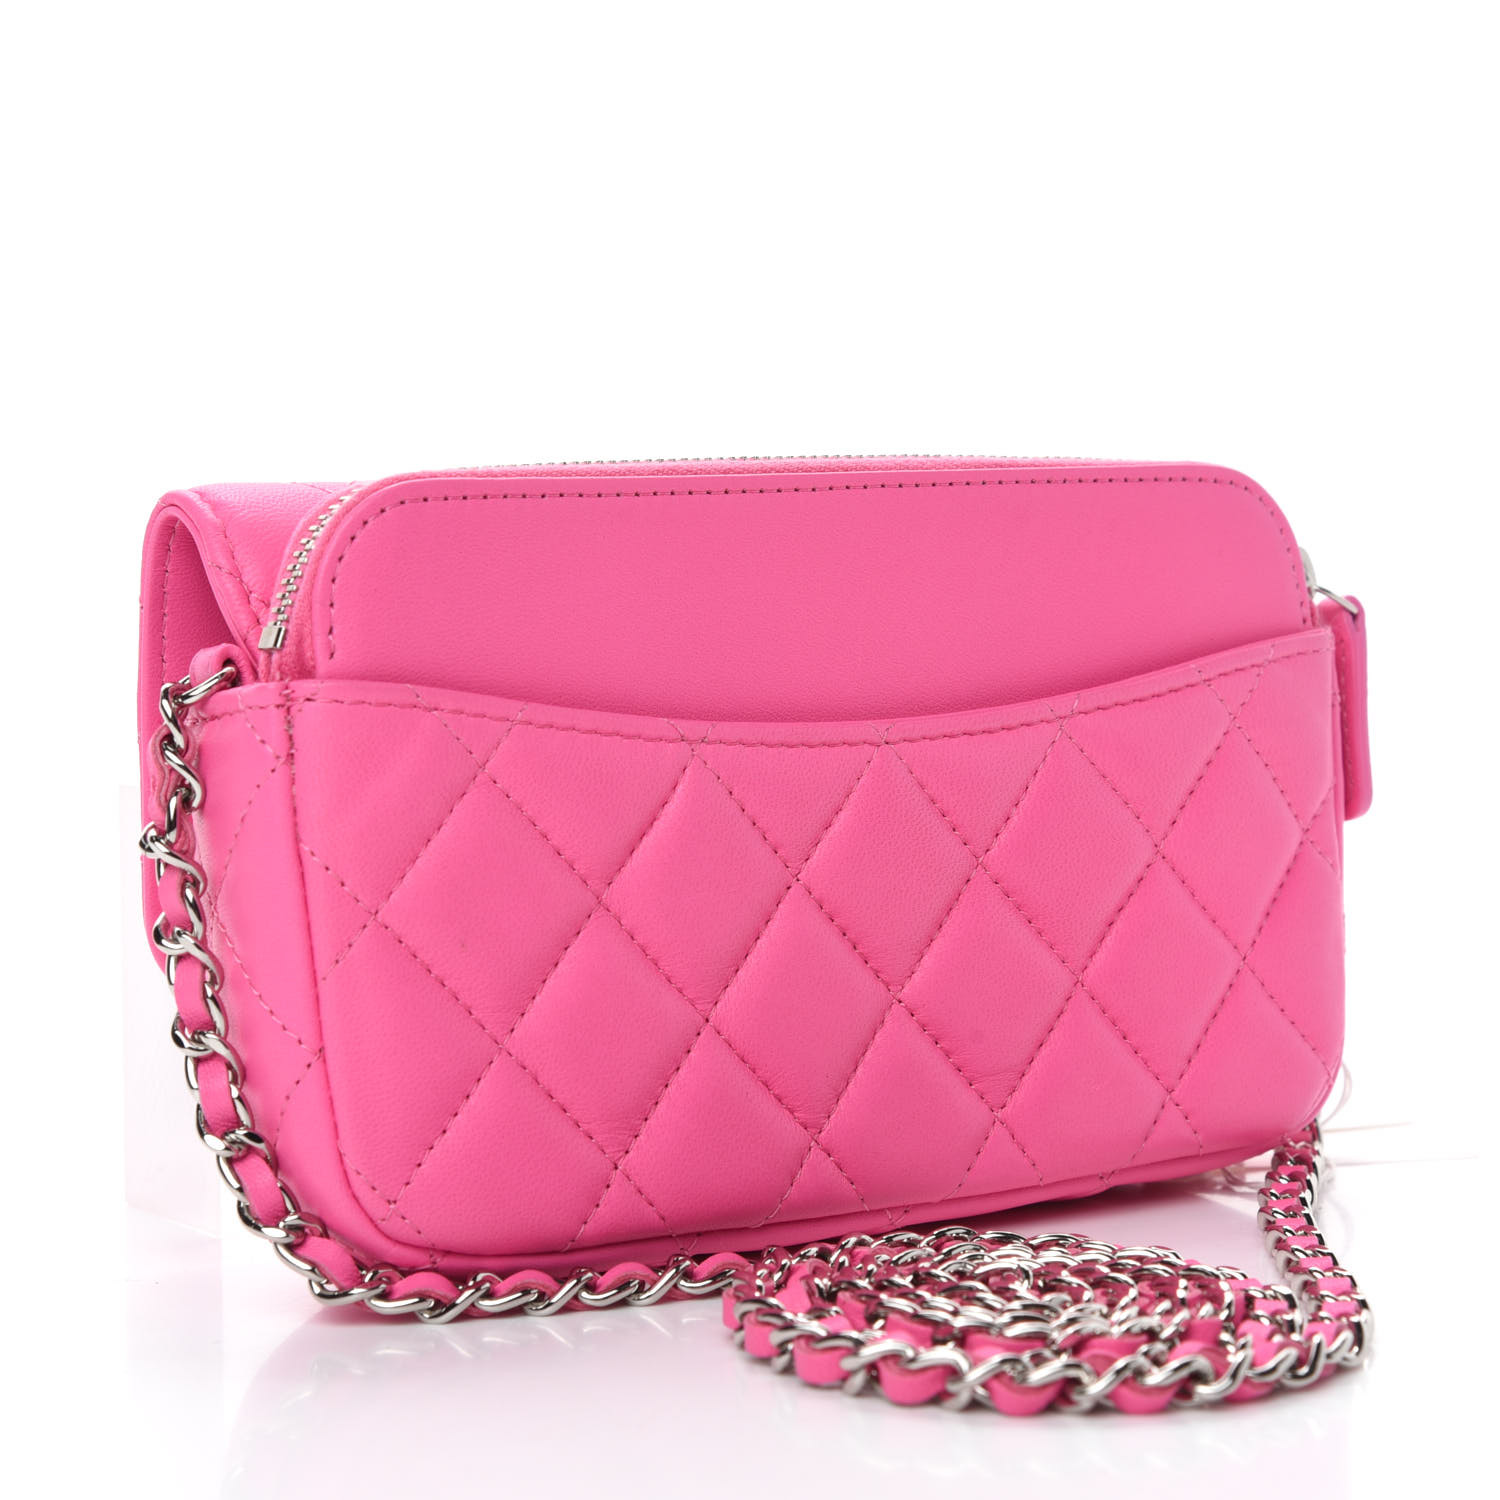 CHANEL Lambskin Quilted Flap Phone Holder With Chain Neon Pink 748642 ...